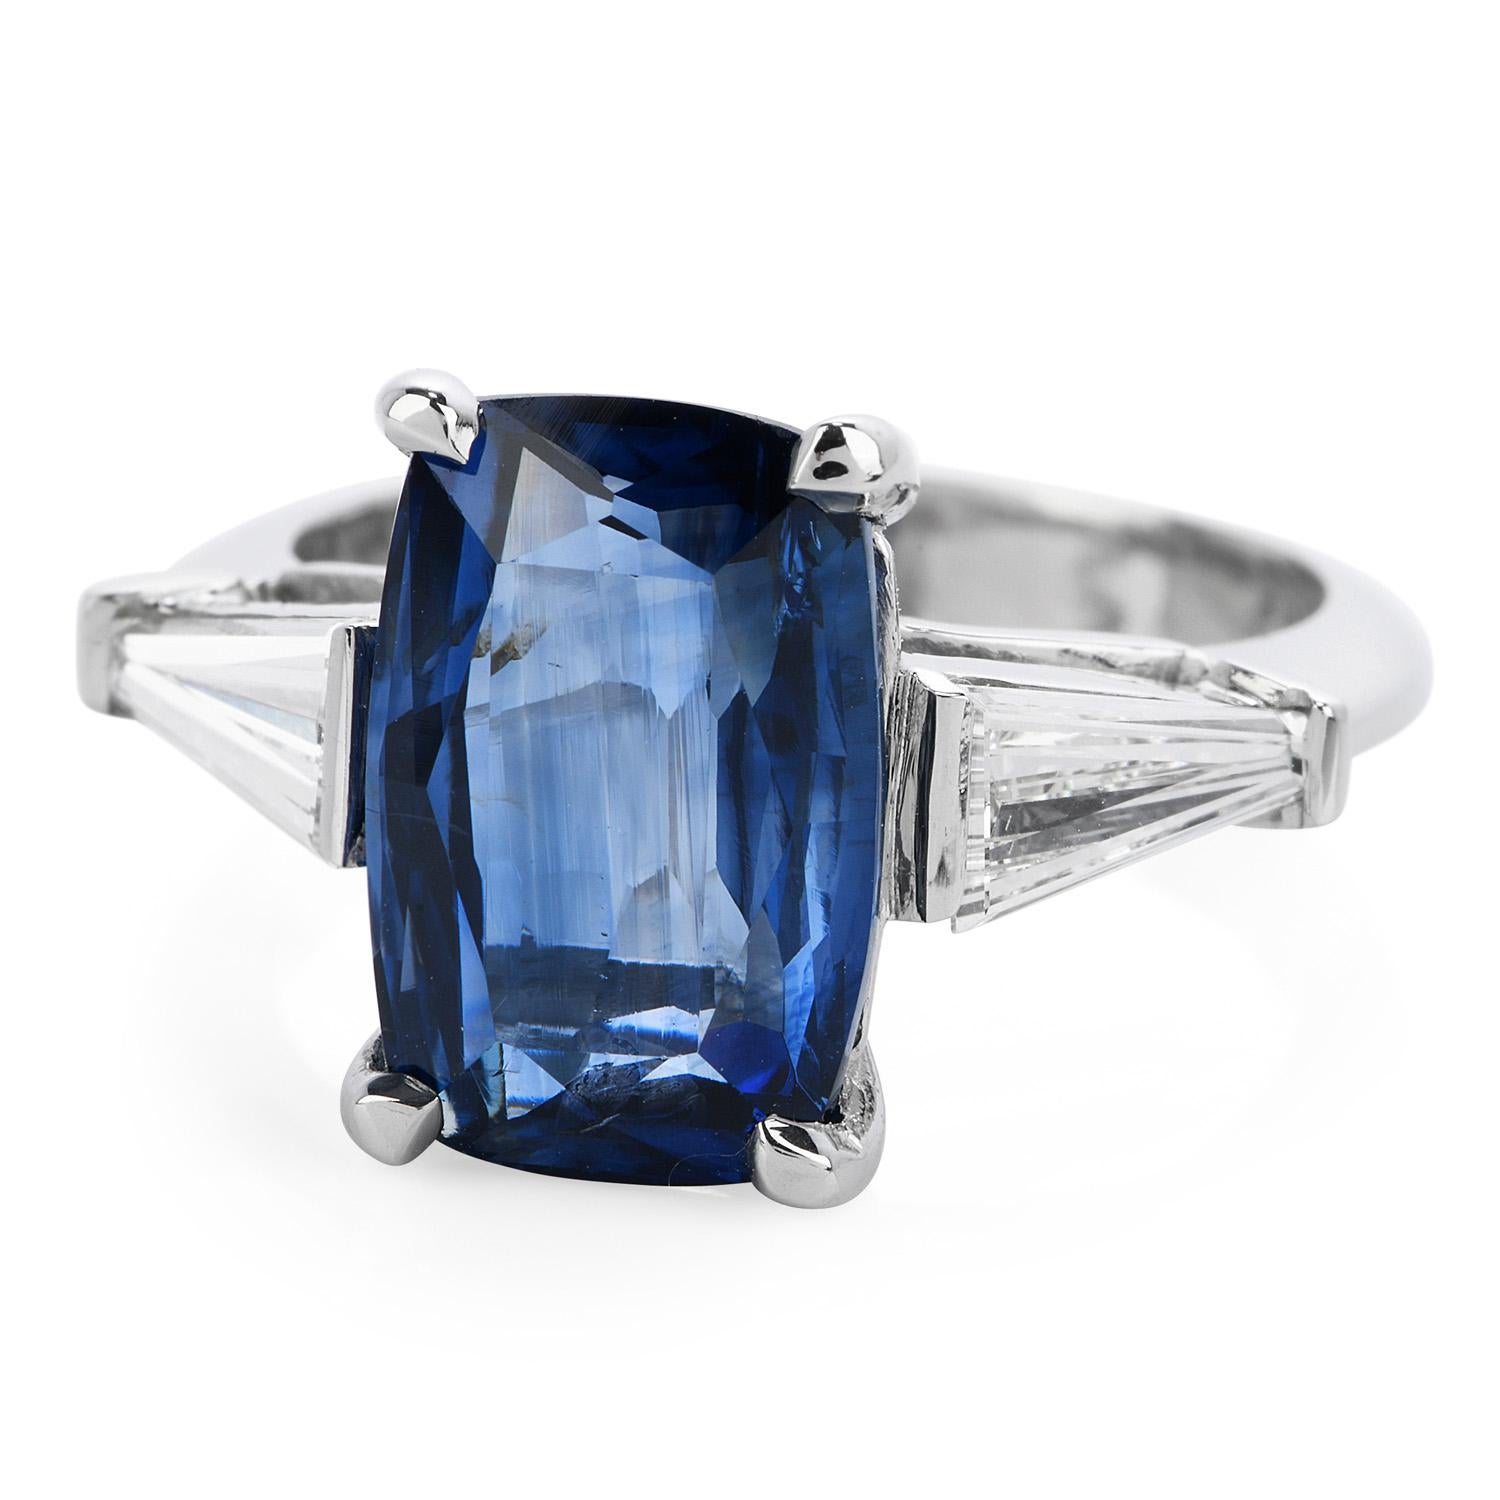 Want to Get Engaged?  Modern not your Style?

This Classic 3 stone design Engagement Ring boasts beauty and 

5.55 Carat Cushion cut No Heat Natural Ceylon Sapphire (Sri Lanka) beaming

with beautiful hues of corn-blue sapphire Offering a hint of